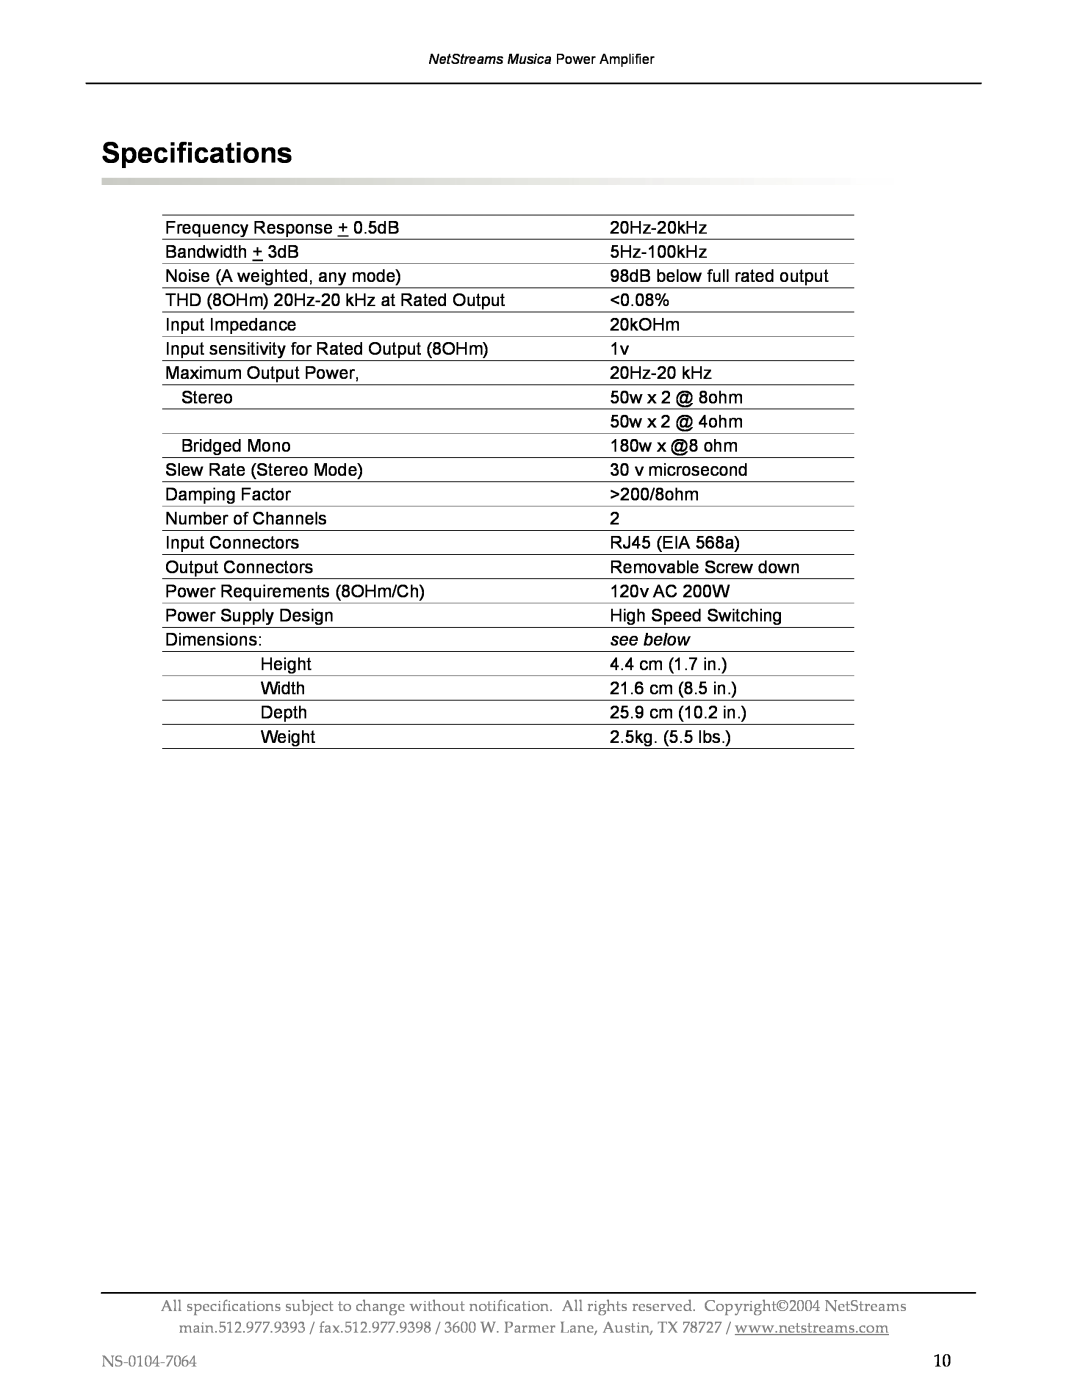 Musica MU290 installation and operation guide Specifications, see below 